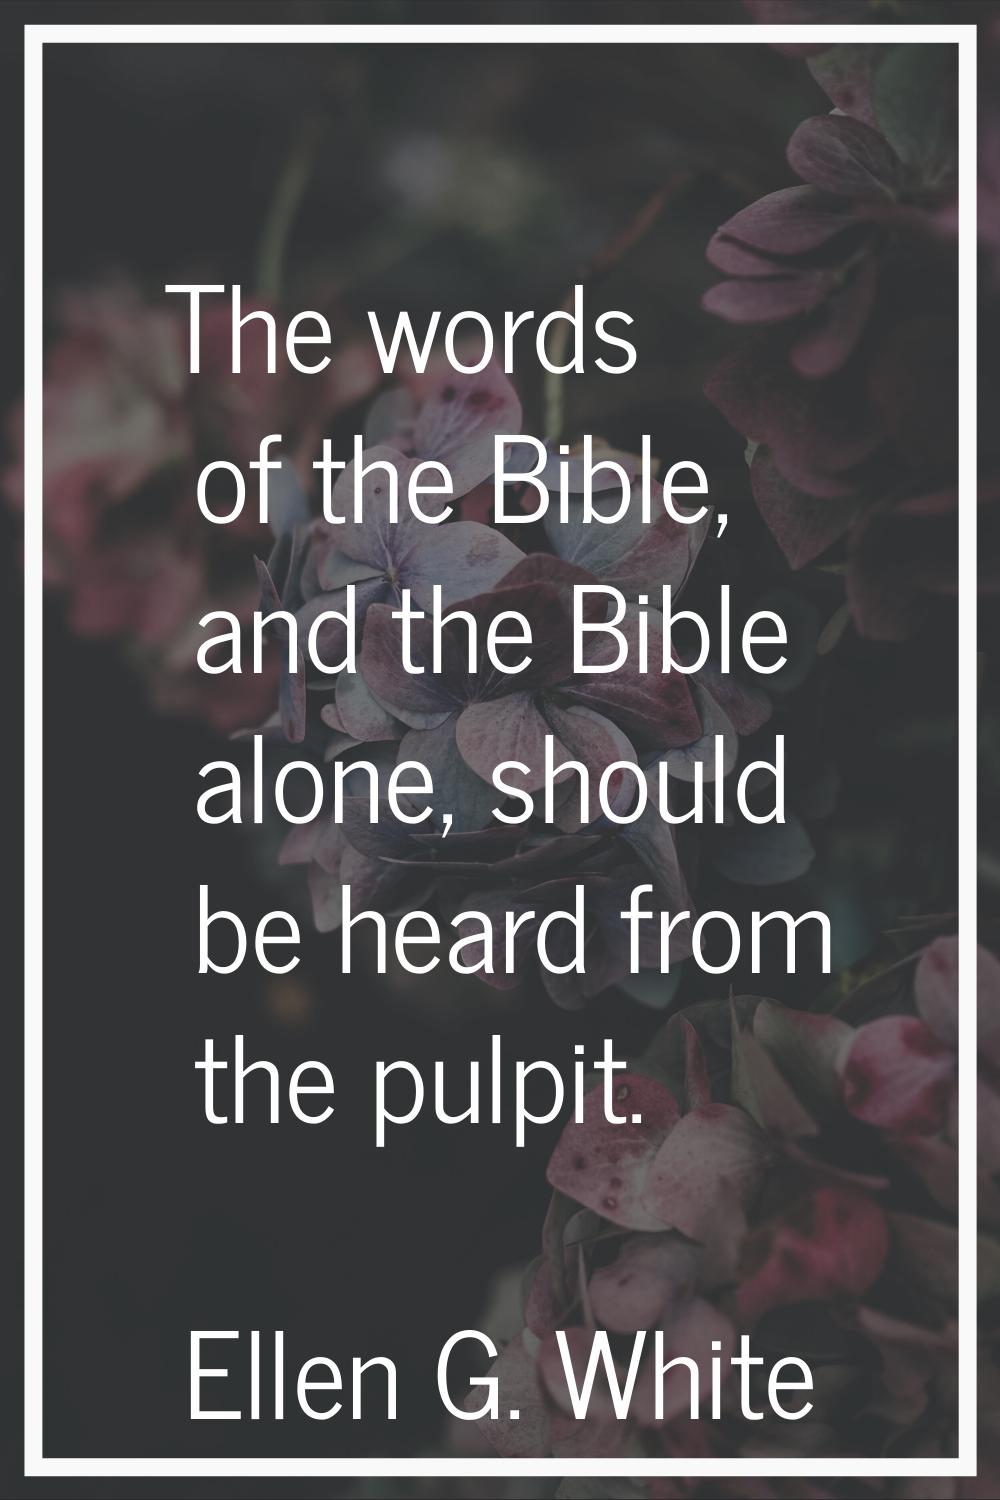 The words of the Bible, and the Bible alone, should be heard from the pulpit.